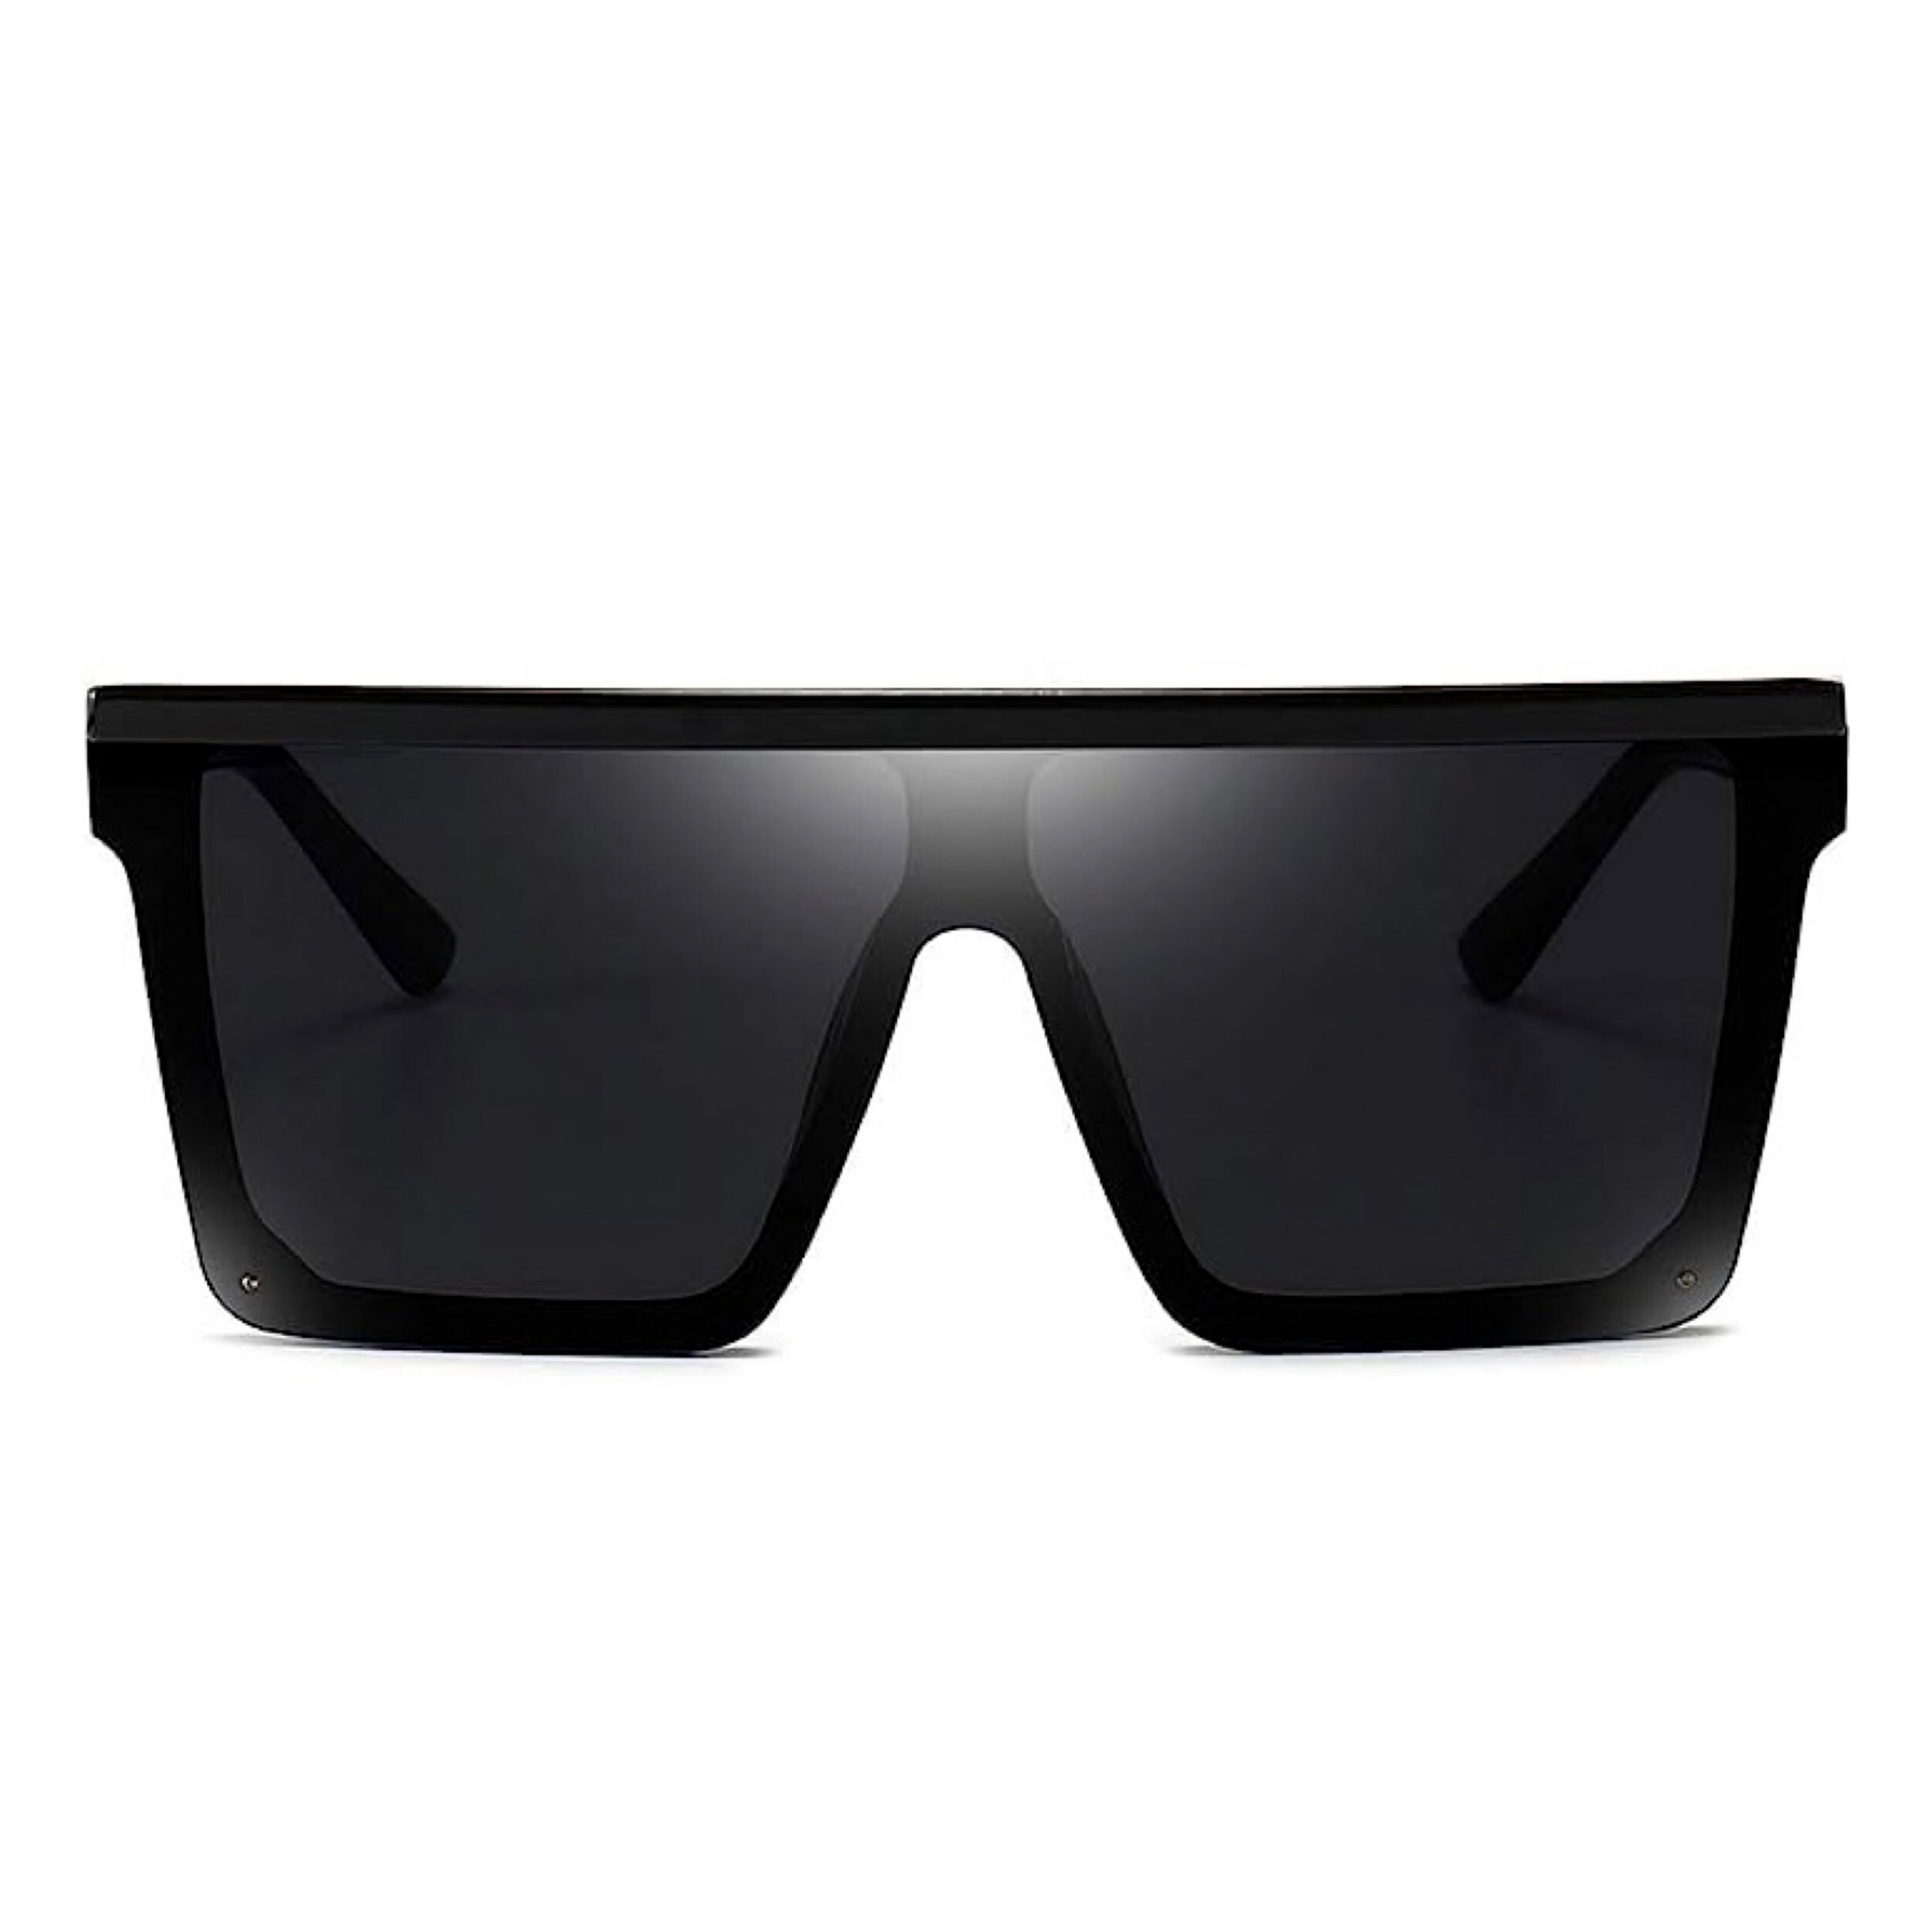 Buy Women's Square Oversized Fashion Flat Top Large Black Frame Shades  Sunglasses Online in India 